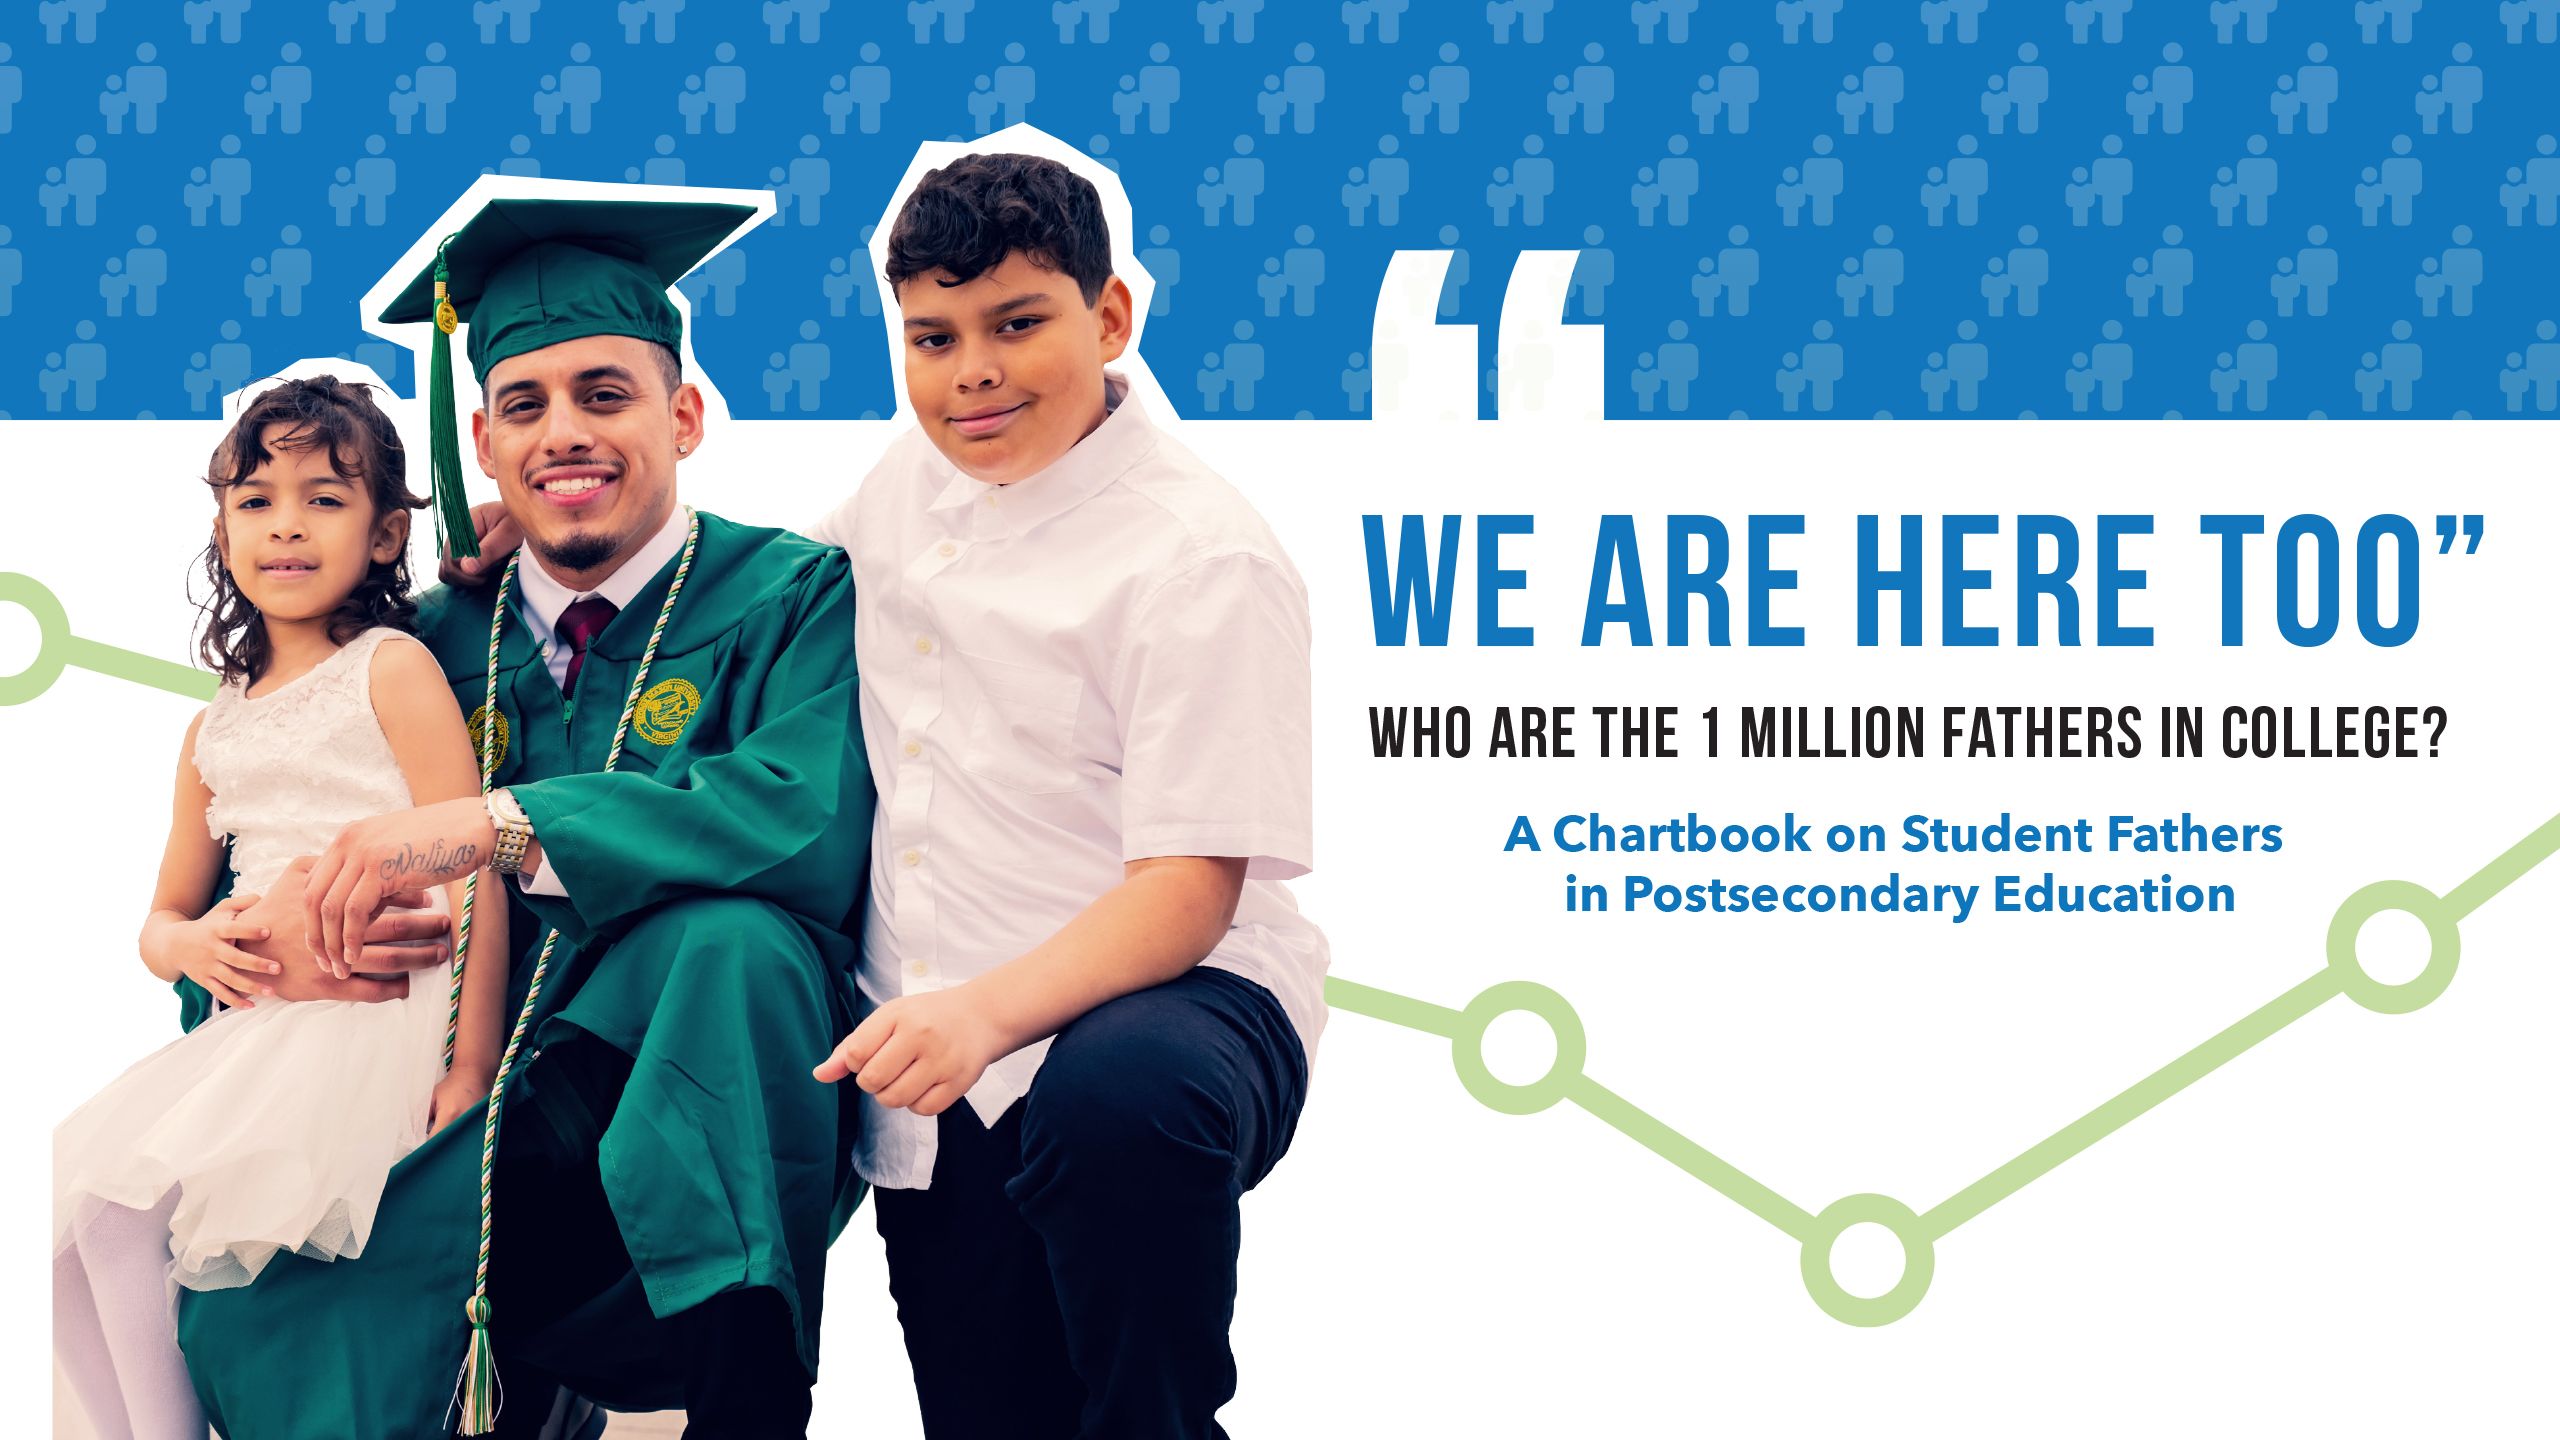 Cover image of the chartbook with the text: "We Are Here Too: Who Are the 1 Million Fathers in College?" A chartbook on student fathers in postsecondary education